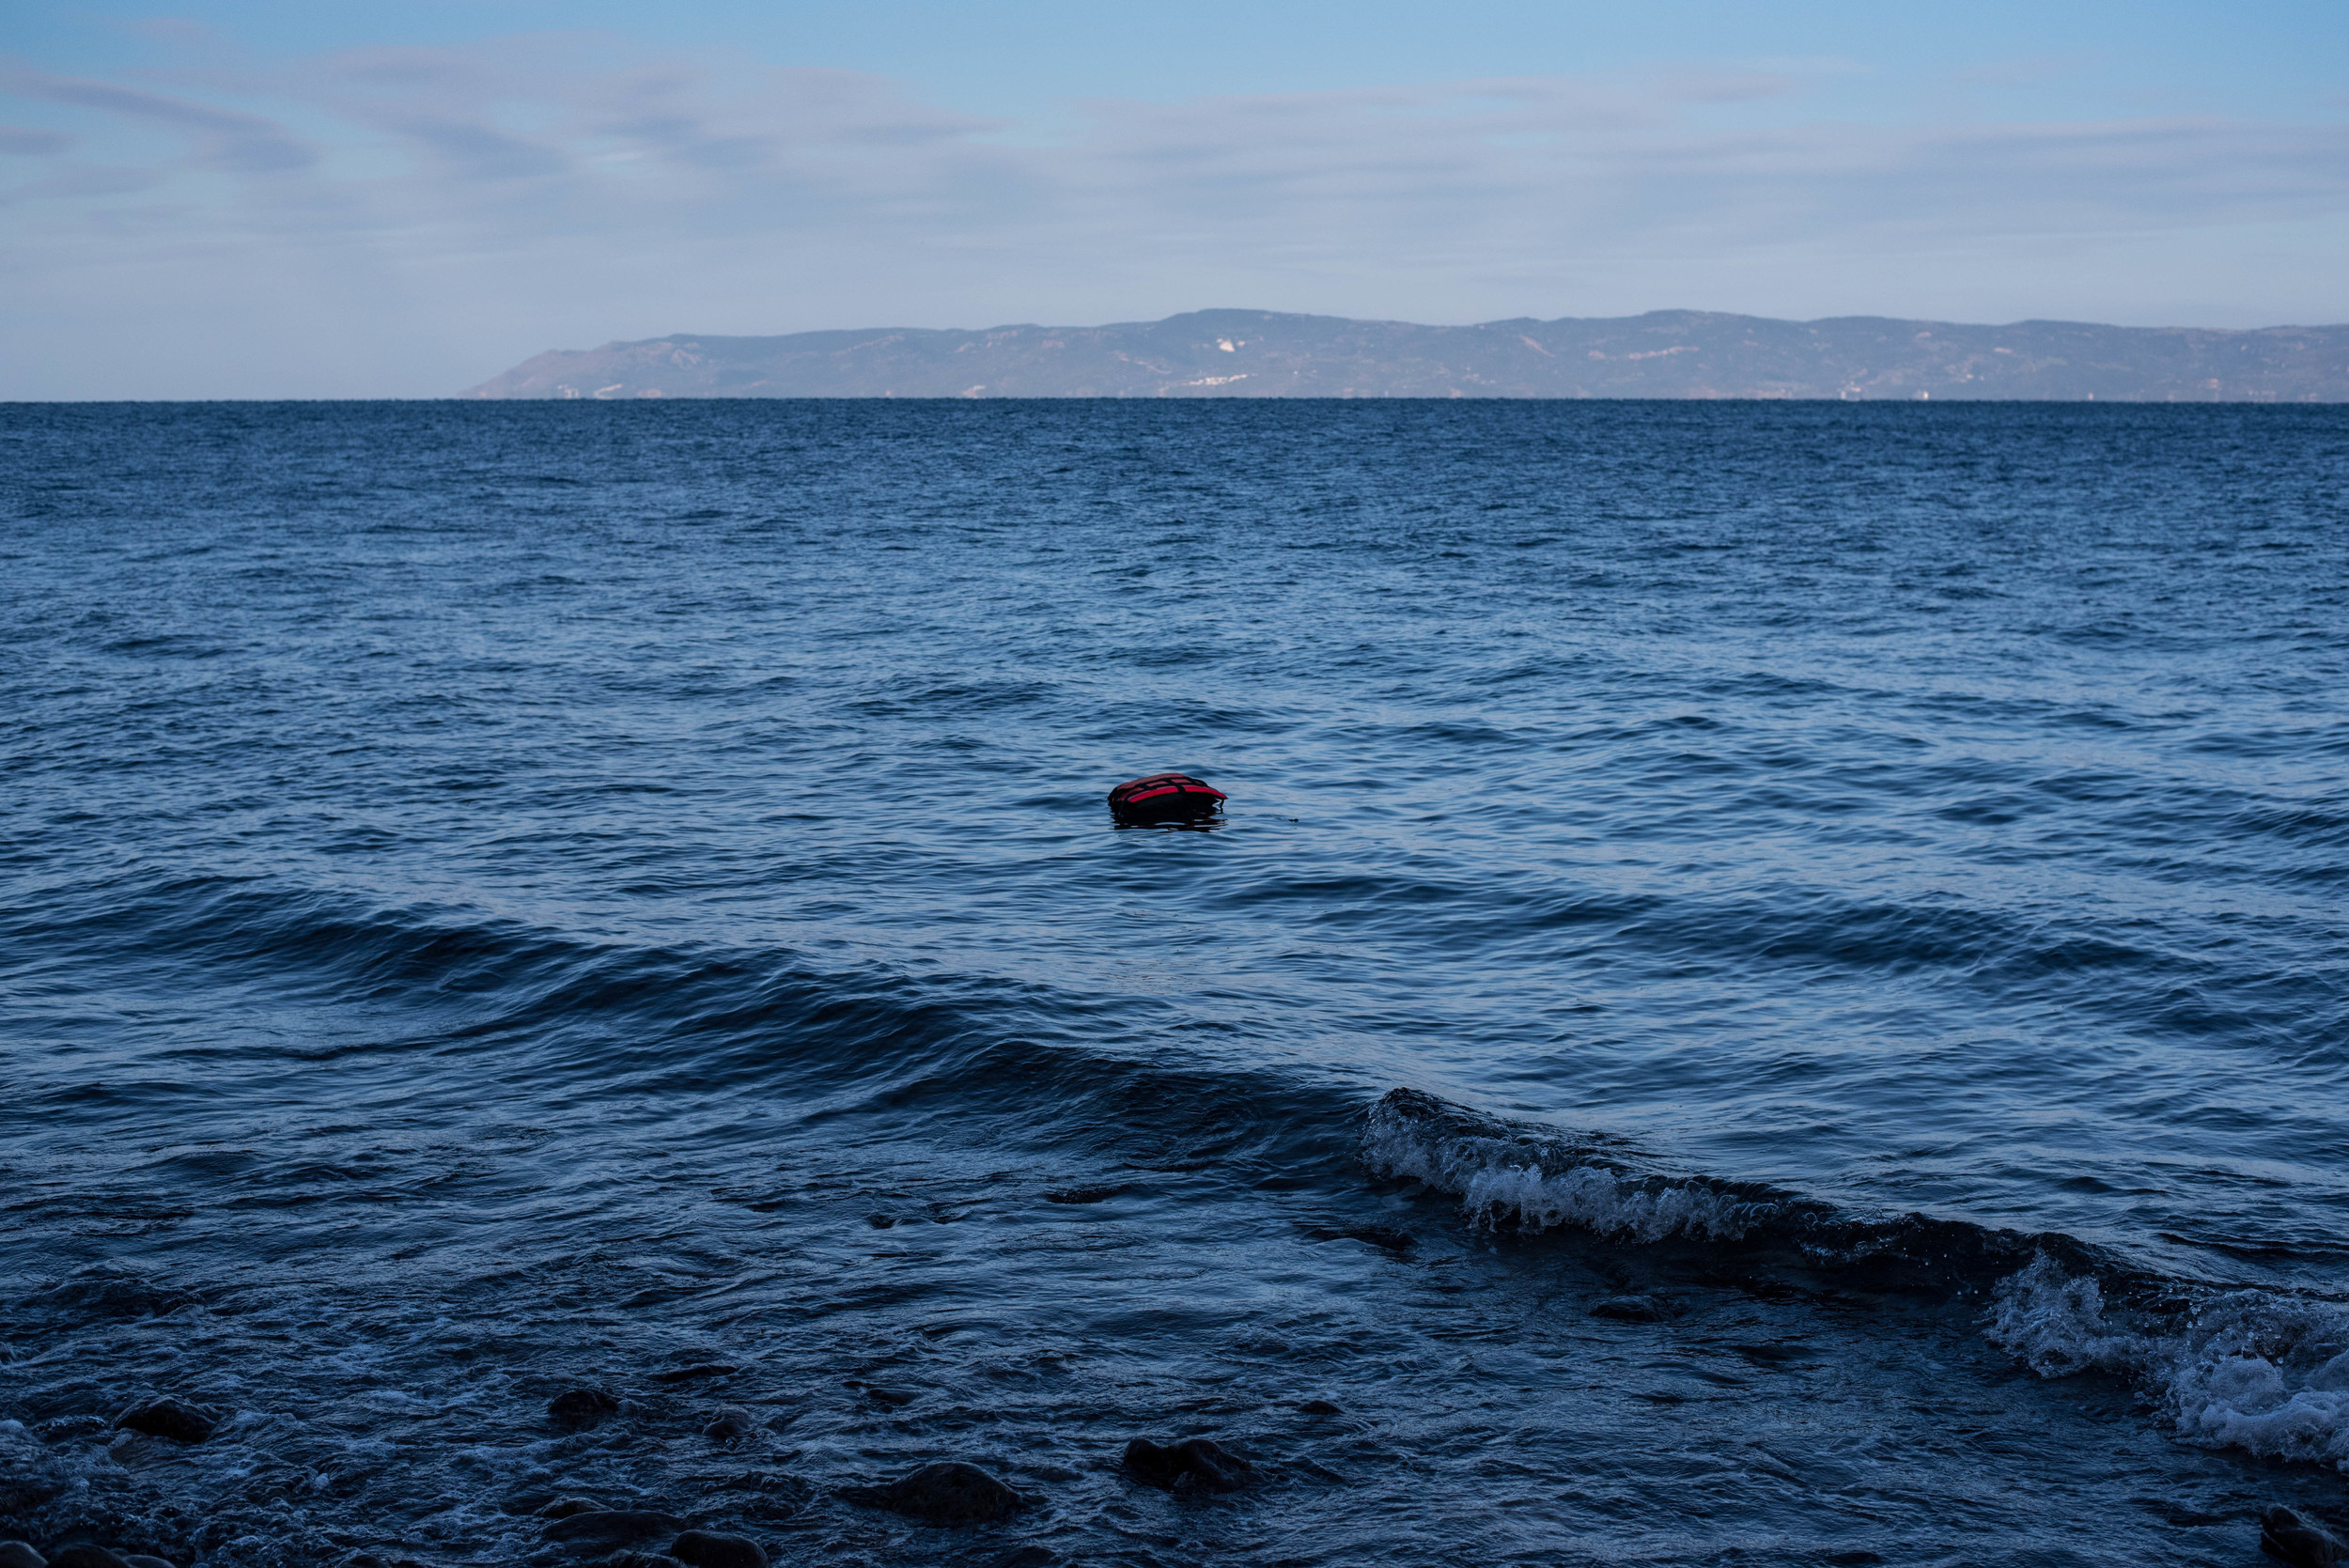  A lone life jacket drifts on the water near the shores of Lesvos, Greece. Most of the life jackets sold to refugees in Turkey are not actually life-saving; instead they're made from cheap pieces of foam and misleadingly display Japanese brand names 